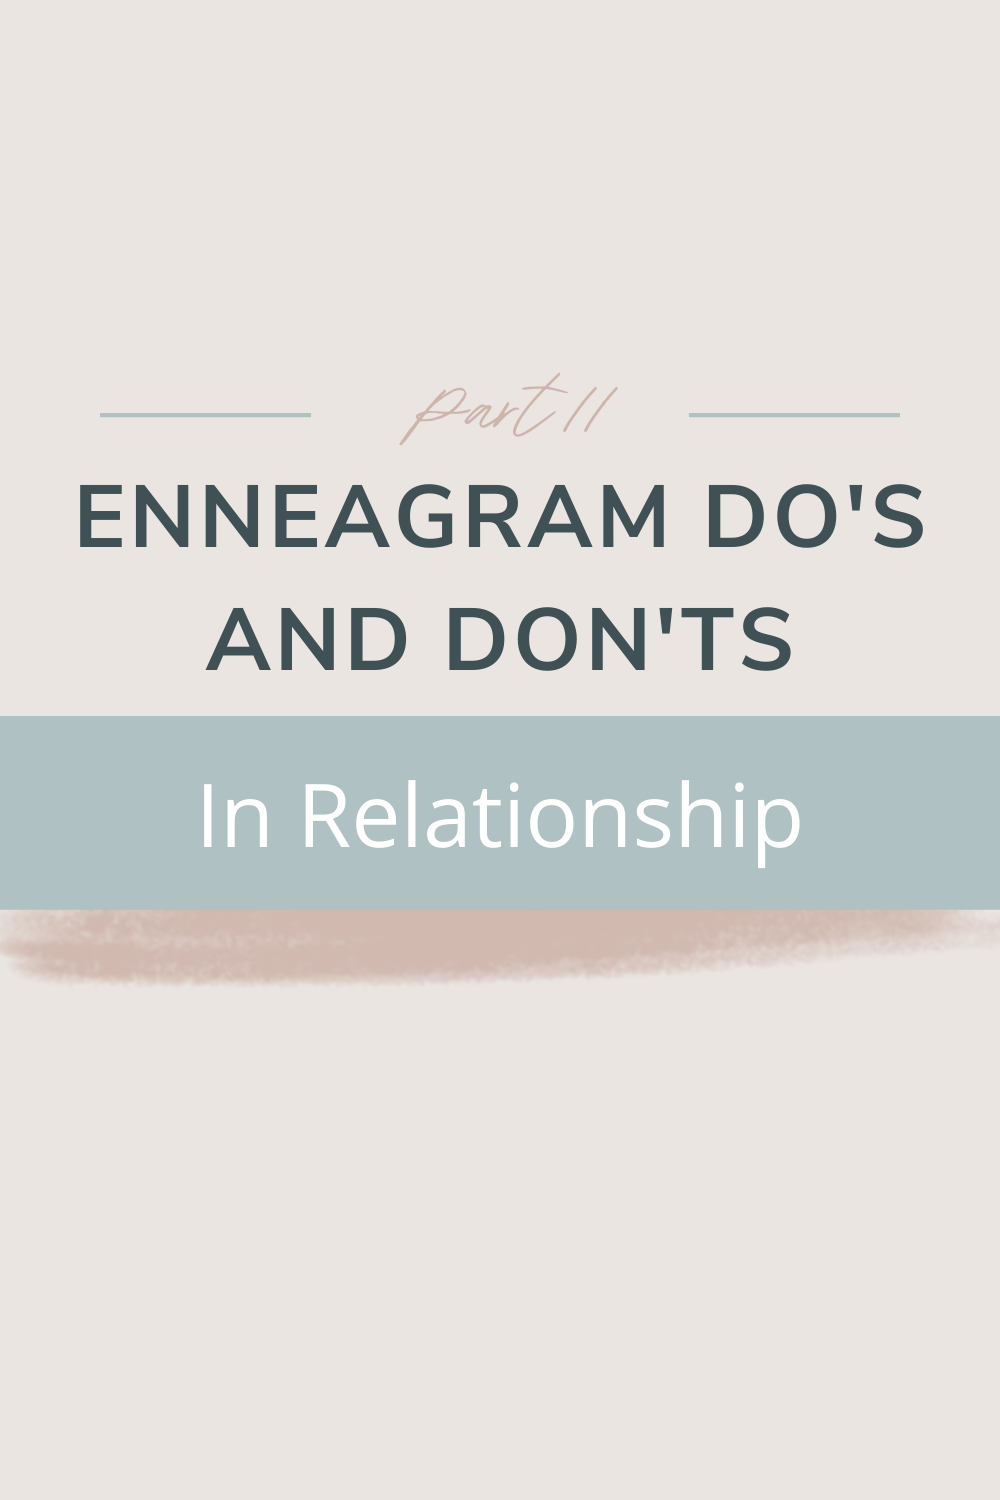 Enneagram Do's and Don'ts In Relationship | Check out part II of our series on do's and dont's in relationships. The Enneagram is a powerful gateway for change and growth in relationships. BUT, you may be engaging in these three HARMFUL patterns. Today's blog unpacks a harmful pattern for couples and how you can change things up to be on the road toward health and unity. Cheers!